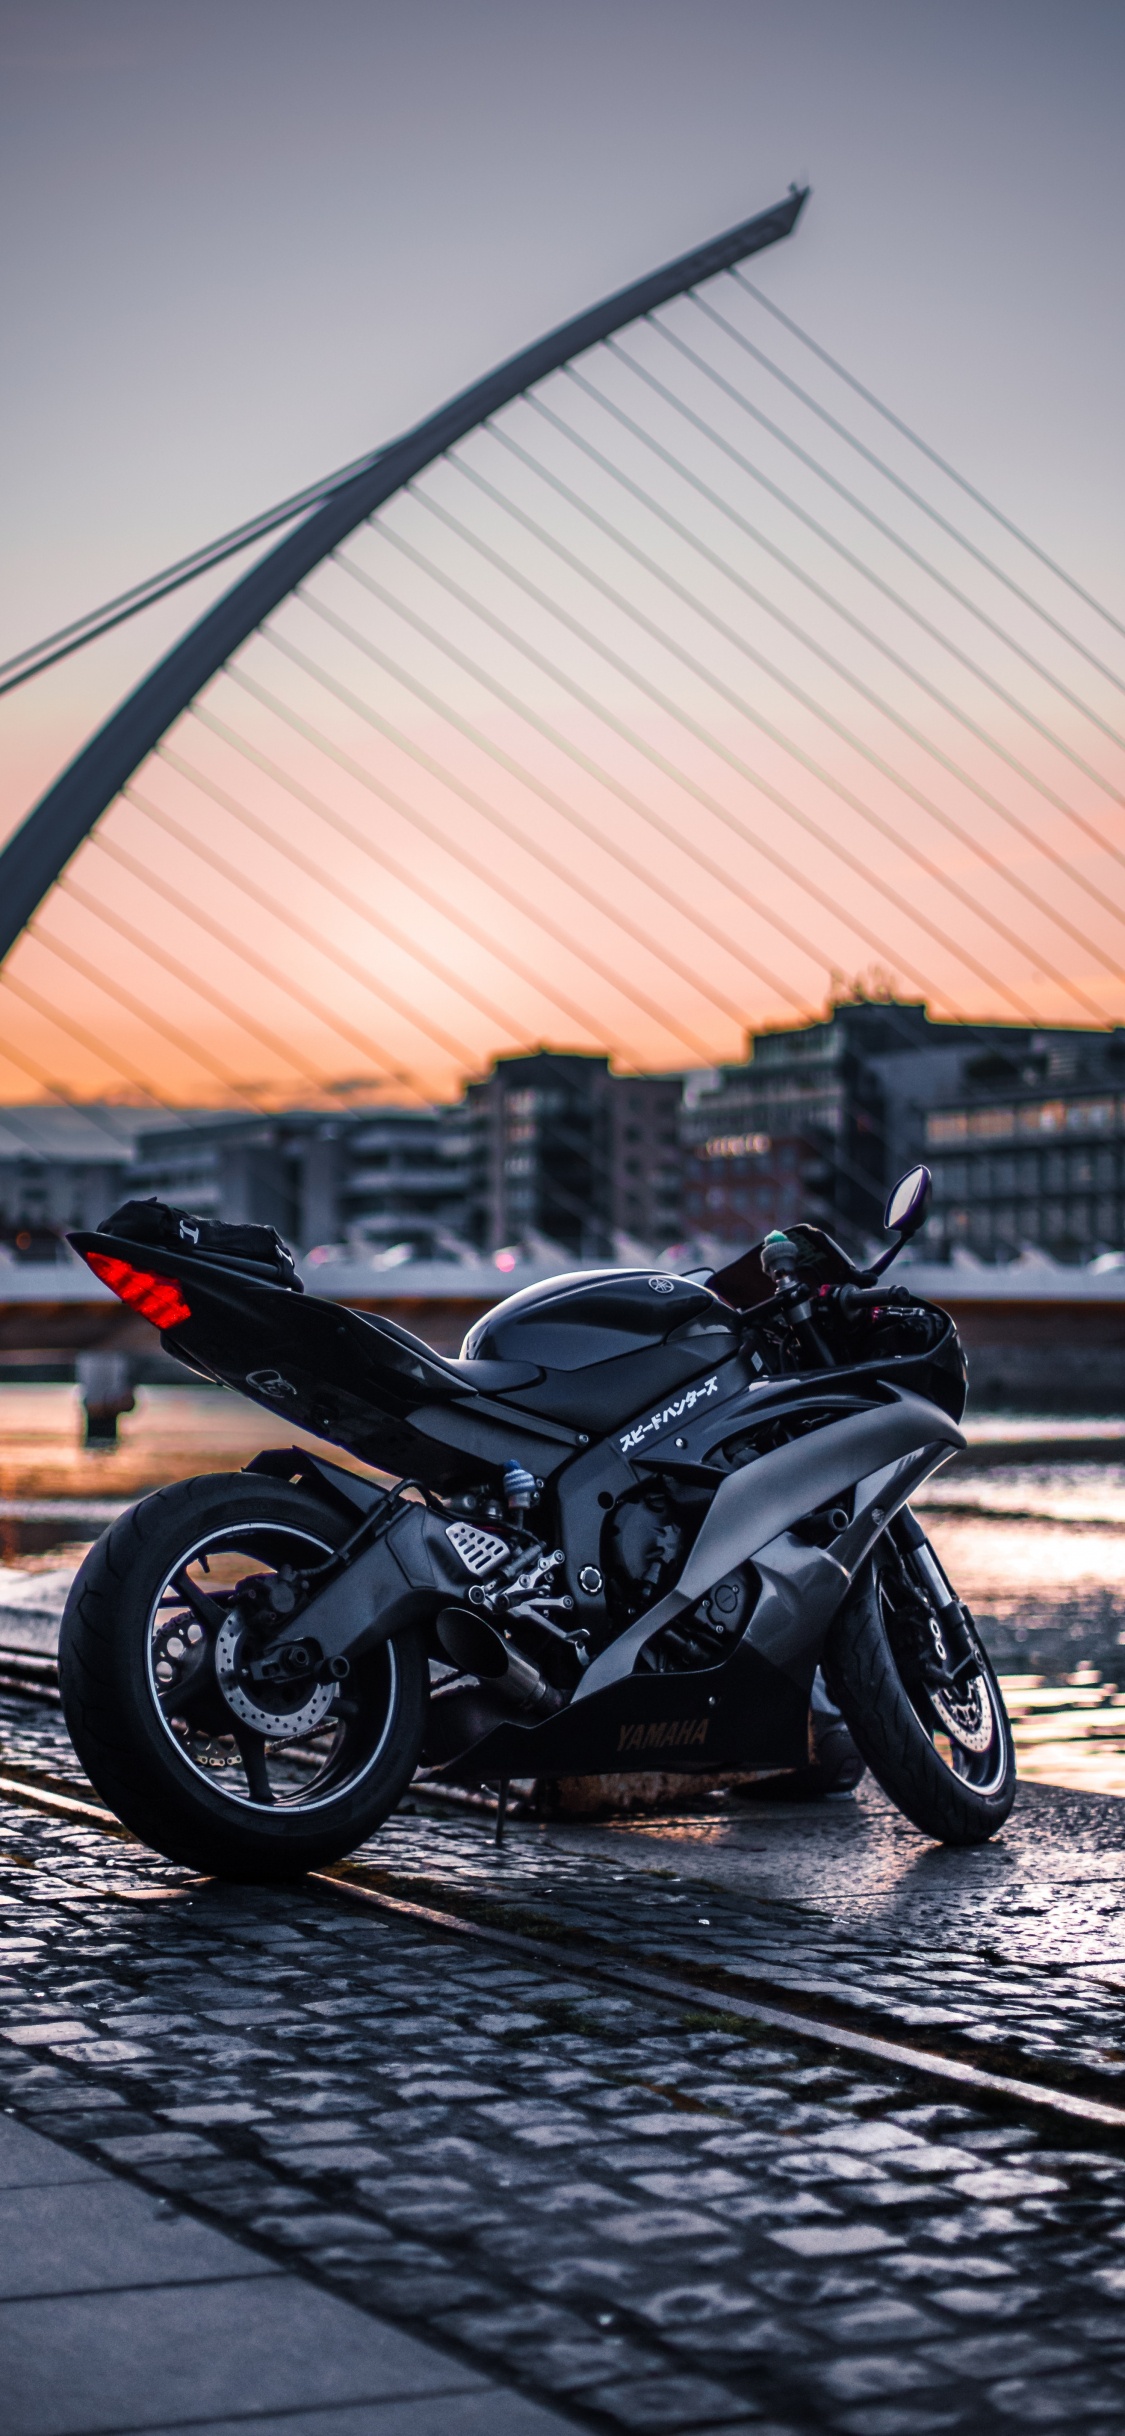 Black Sports Bike Parked on The Side of The Road. Wallpaper in 1125x2436 Resolution